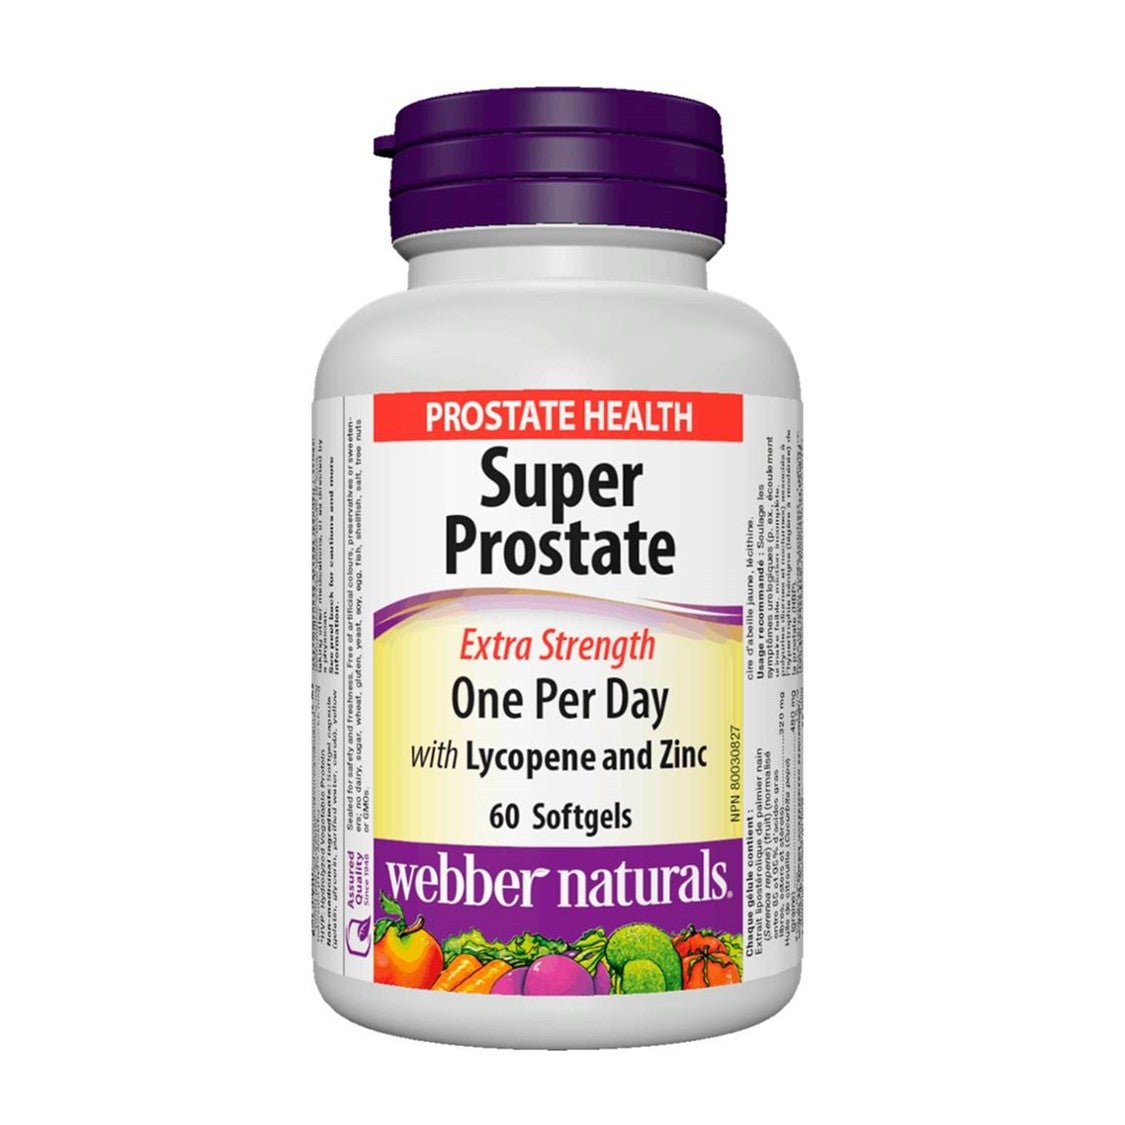 webber-naturals-super-prostate-extra-strength-one-per-day-lycopene-with-zinc-60softgels